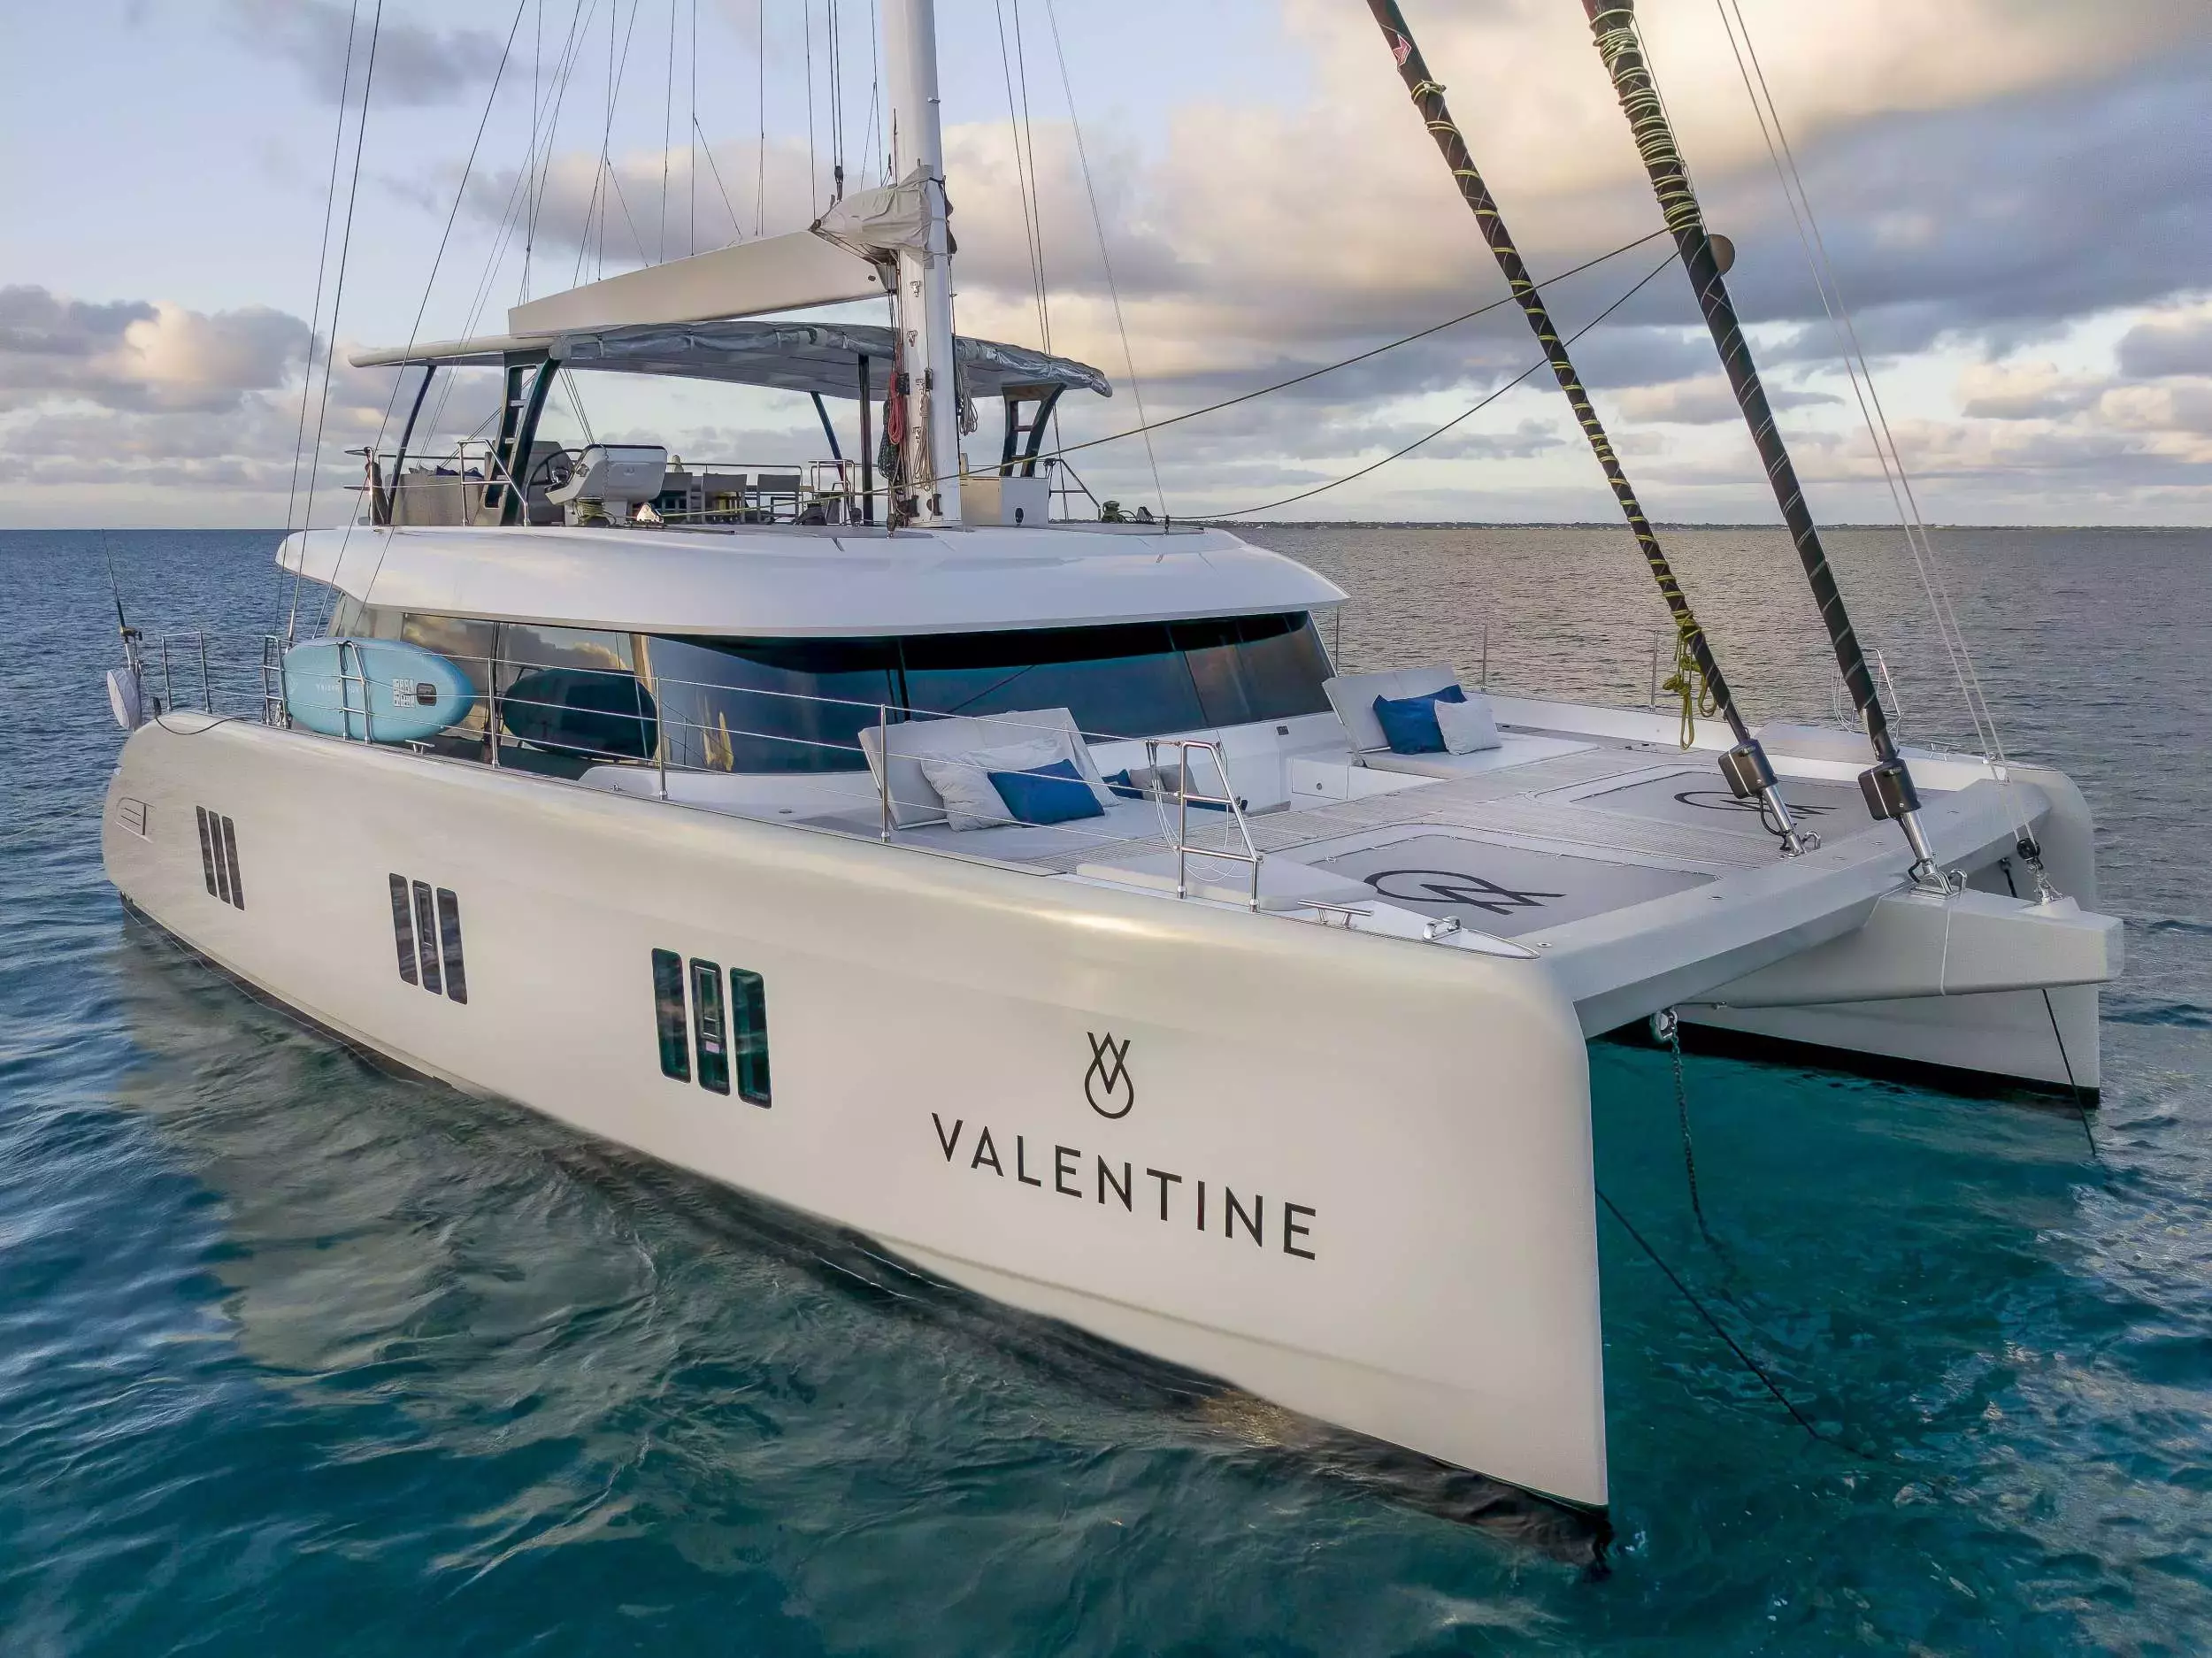 Valentine by Sunreef Yachts - Special Offer for a private Power Catamaran Charter in Virgin Gorda with a crew